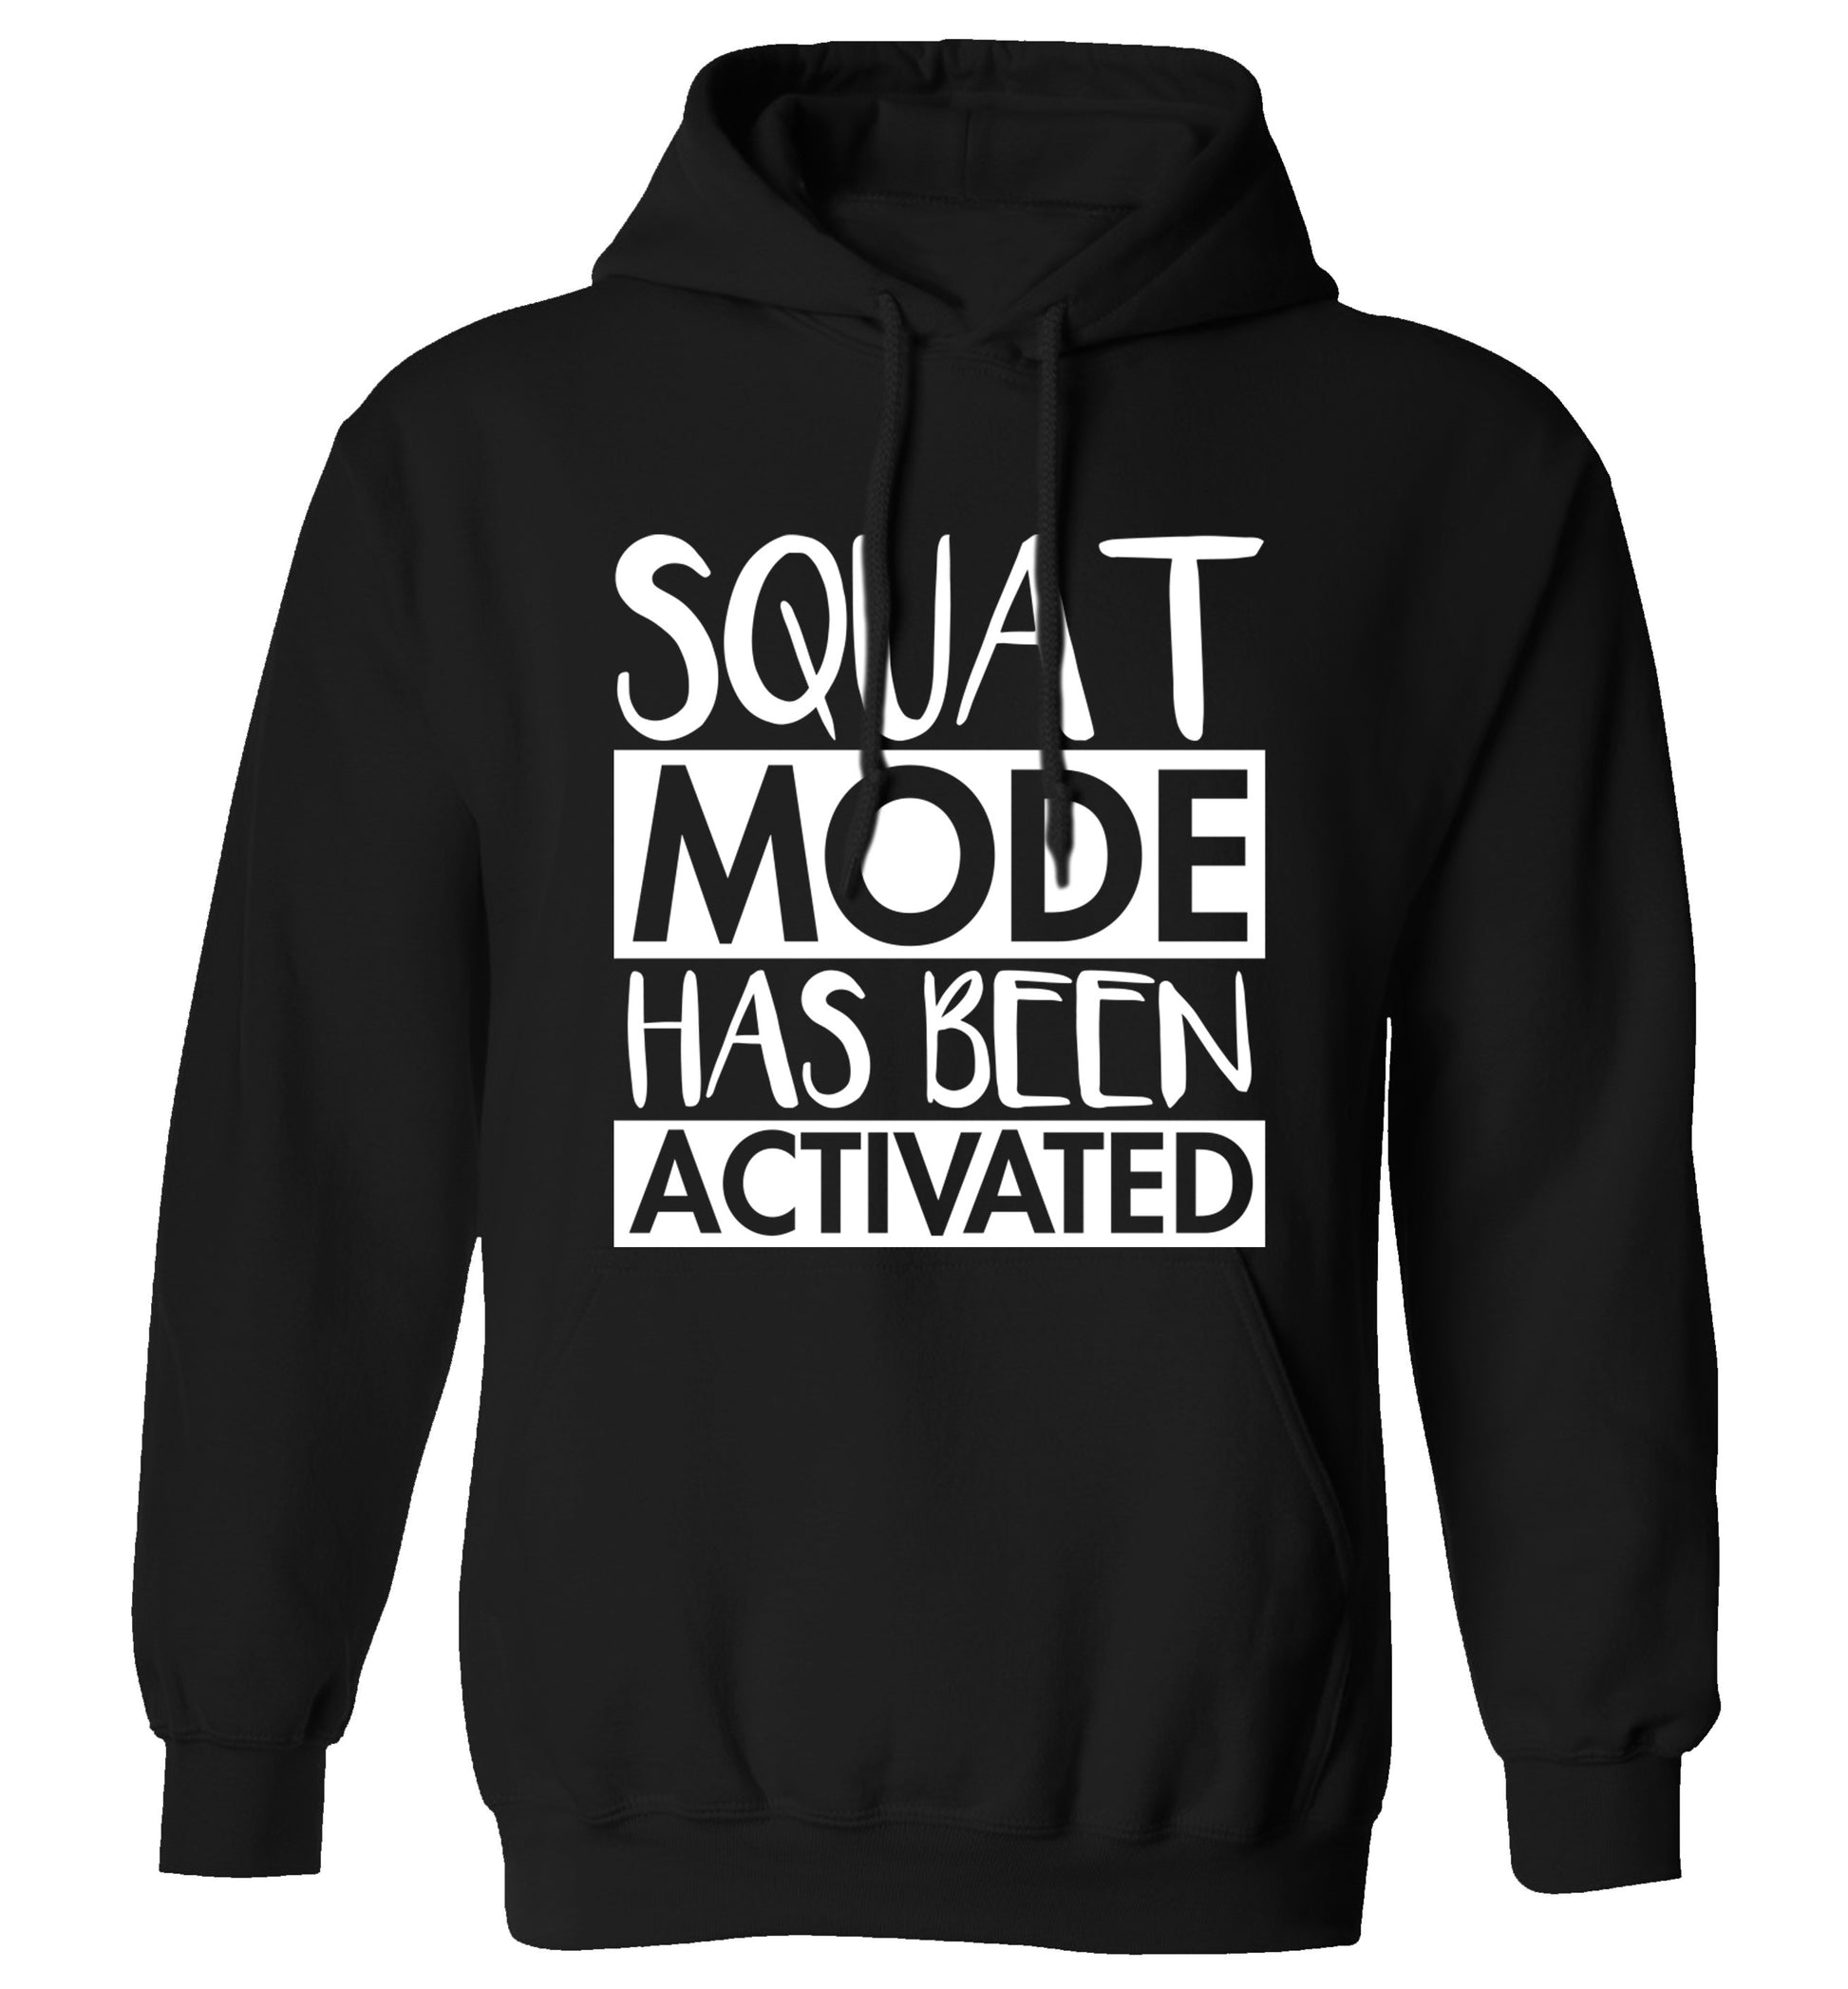 Squat mode activated adults unisex black hoodie 2XL